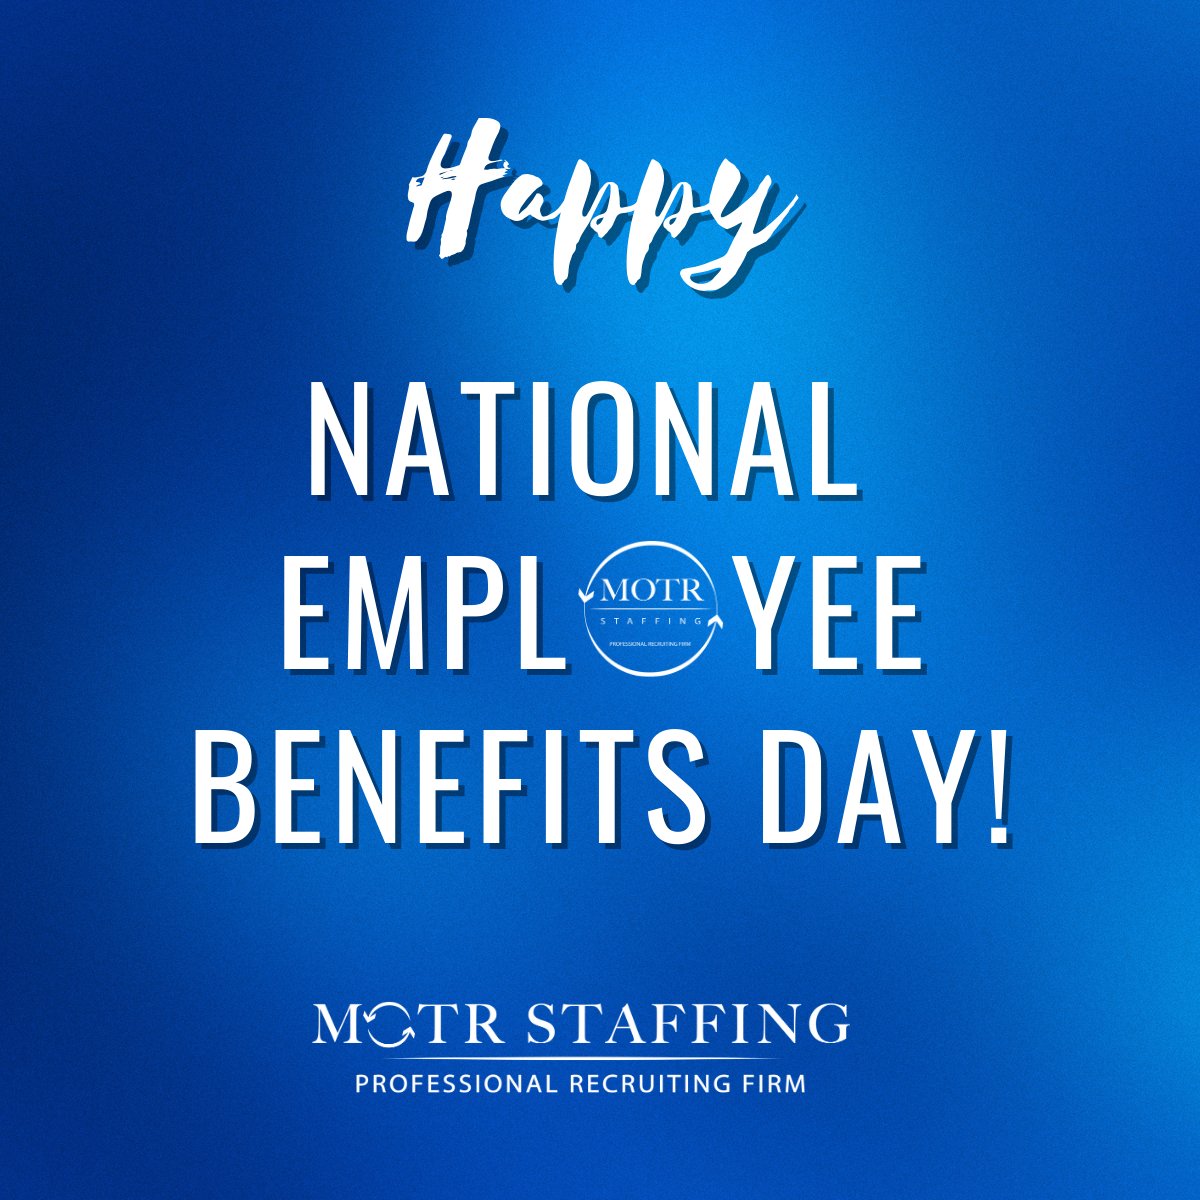 Happy National Employee Benefits Day!    

This day was created to appreciate the hard work and planning done by the team of employers who strive towards providing benefits to their employees that make a helpful change in their lives.  

#NationalEmployeeBenefitsDay